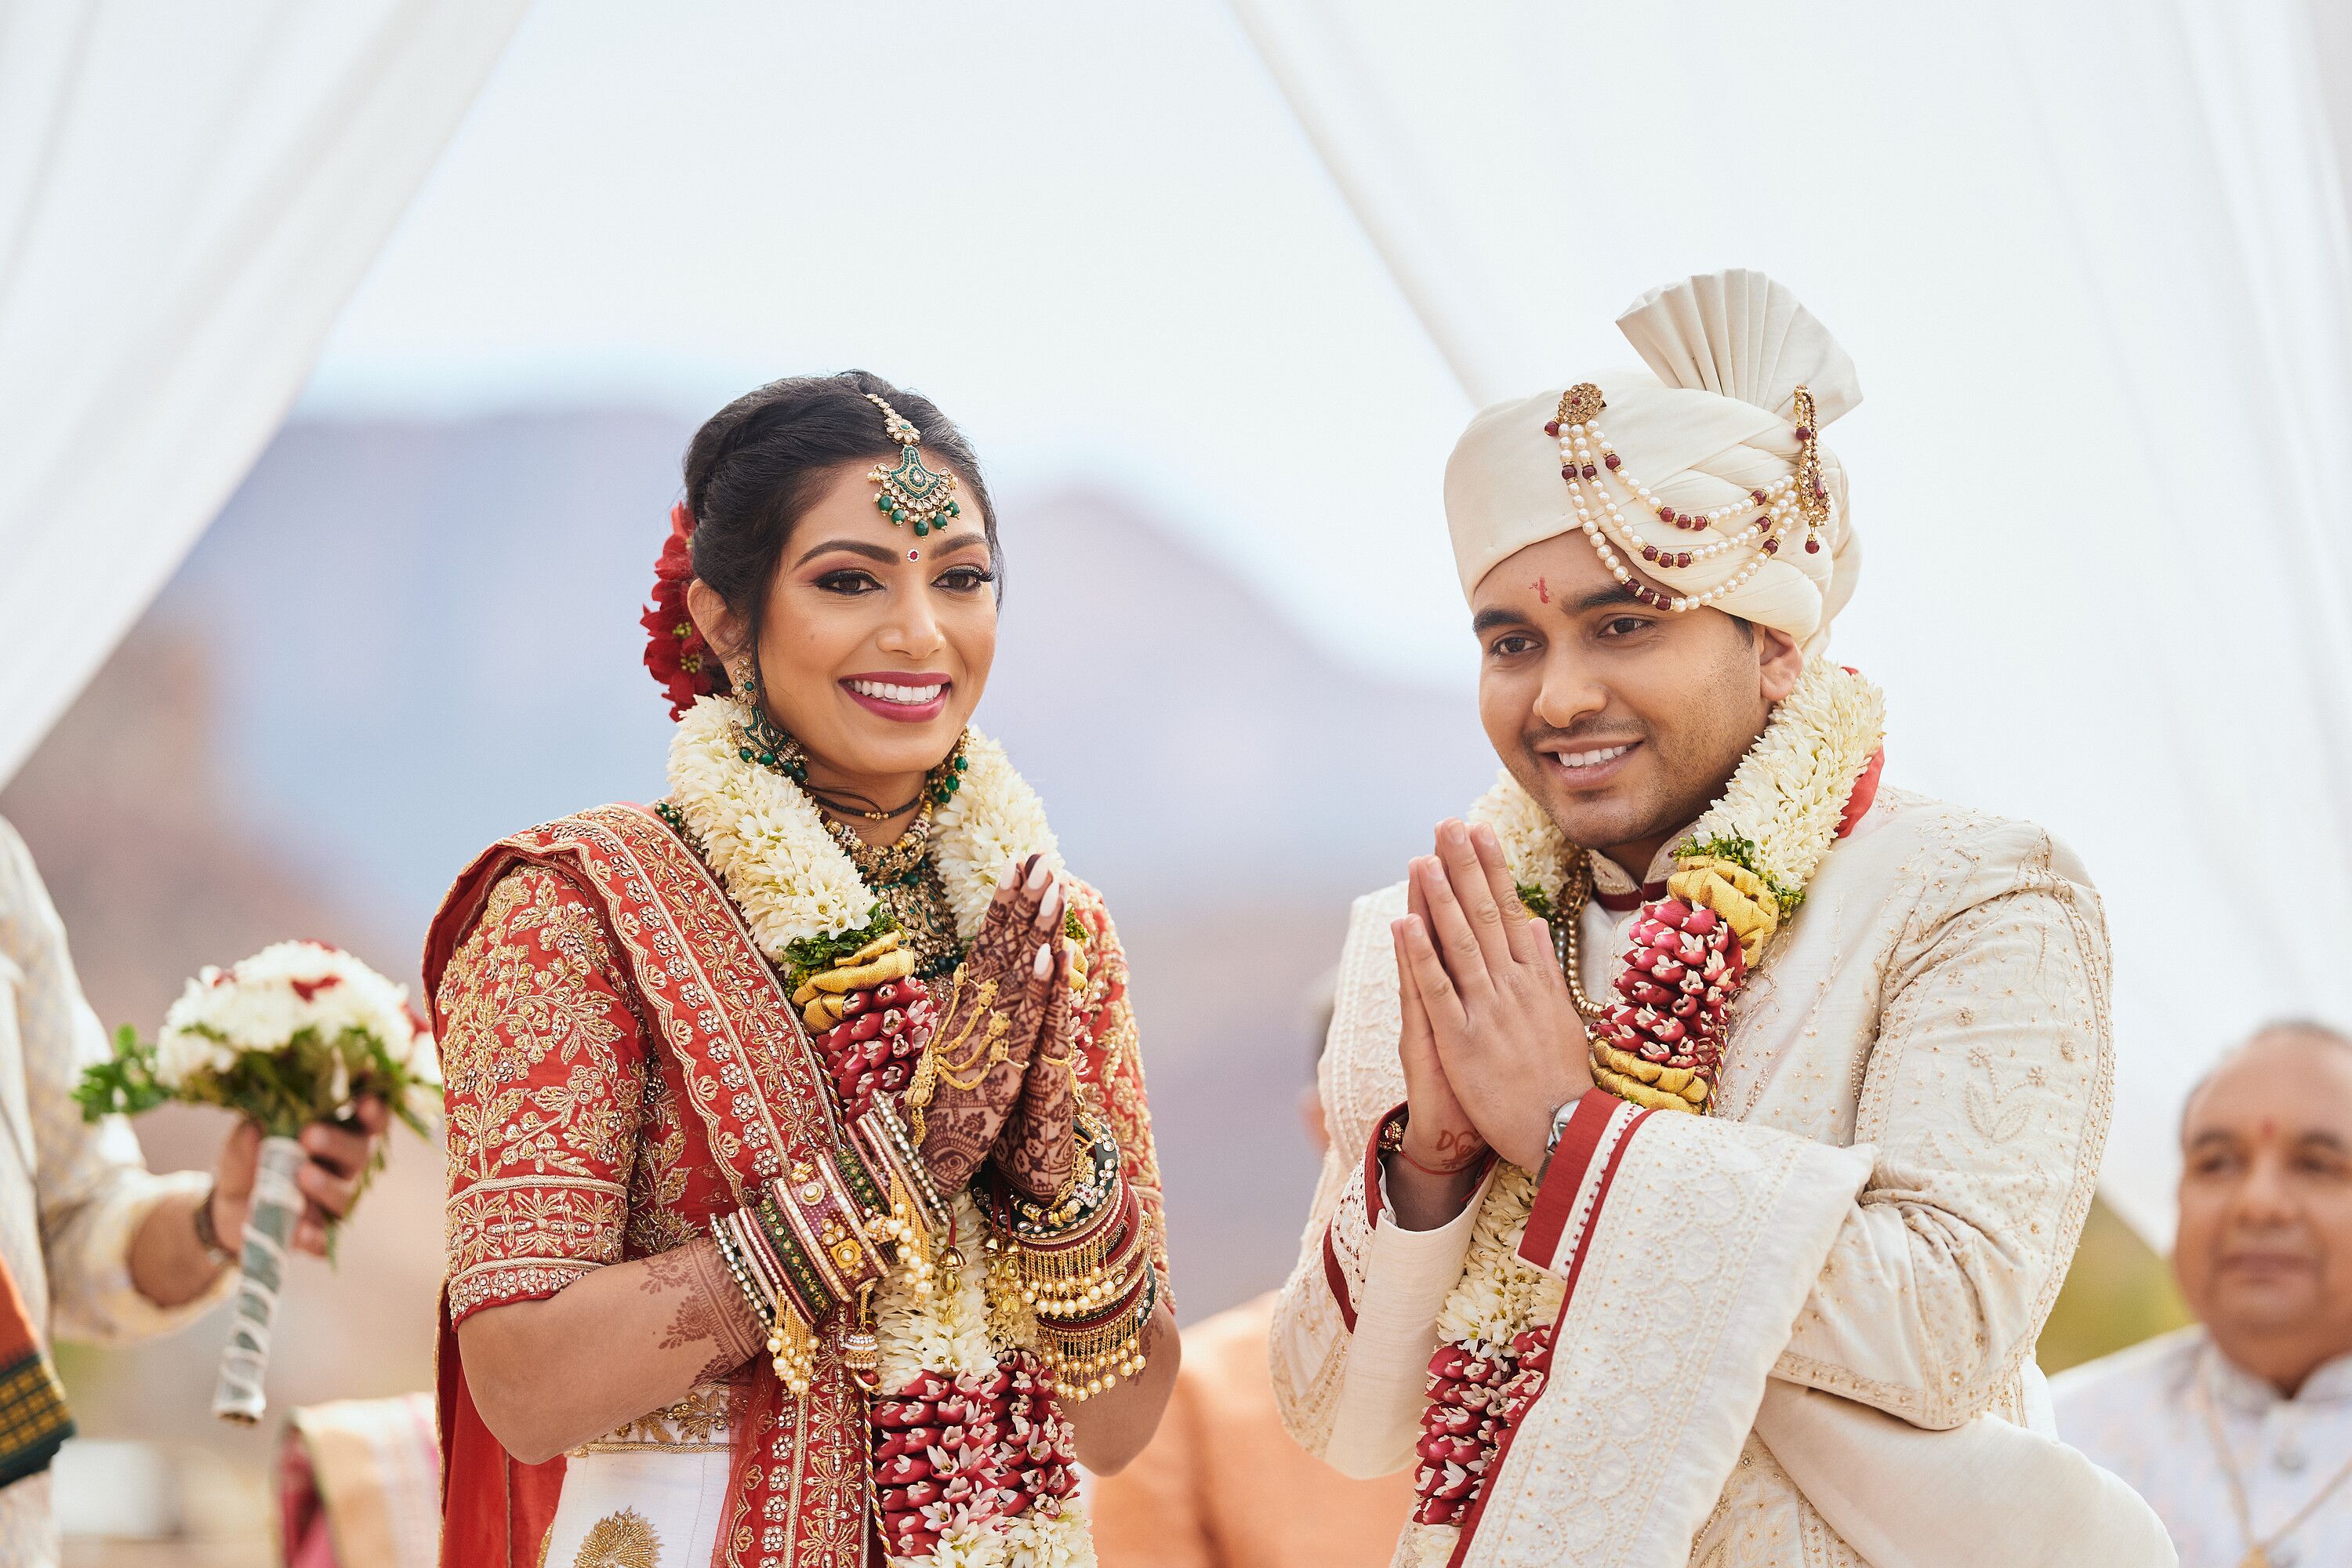 What To Expect at a North Indian Wedding: A Grand Celebration of Culture,  Tradition, and Love - DWP Insider